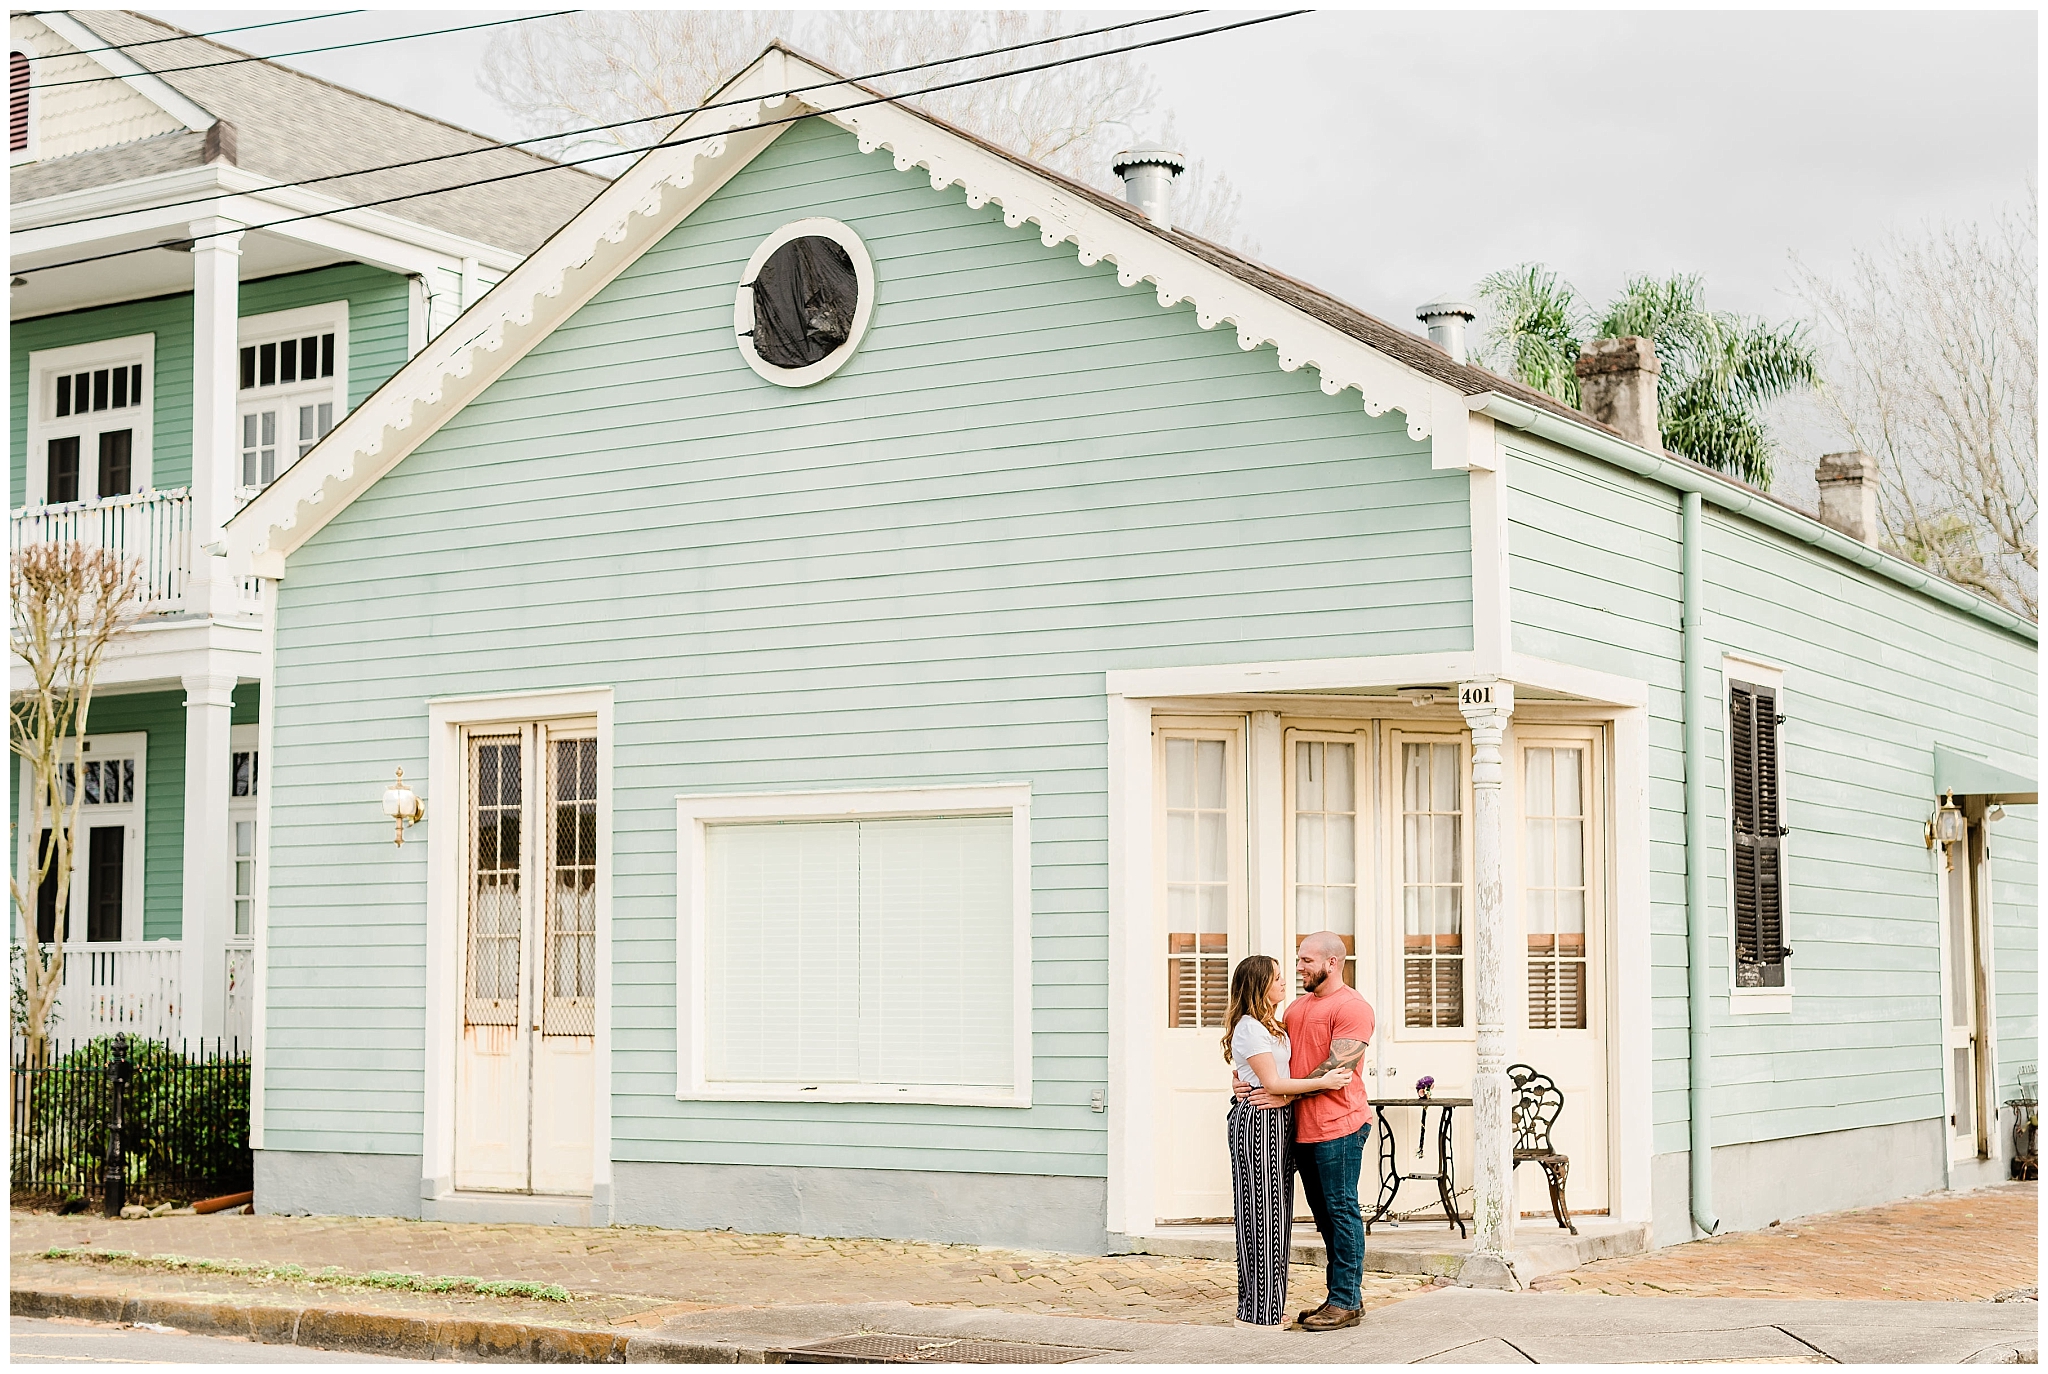 Couple stands near mint green building in downtown algiers new orleans